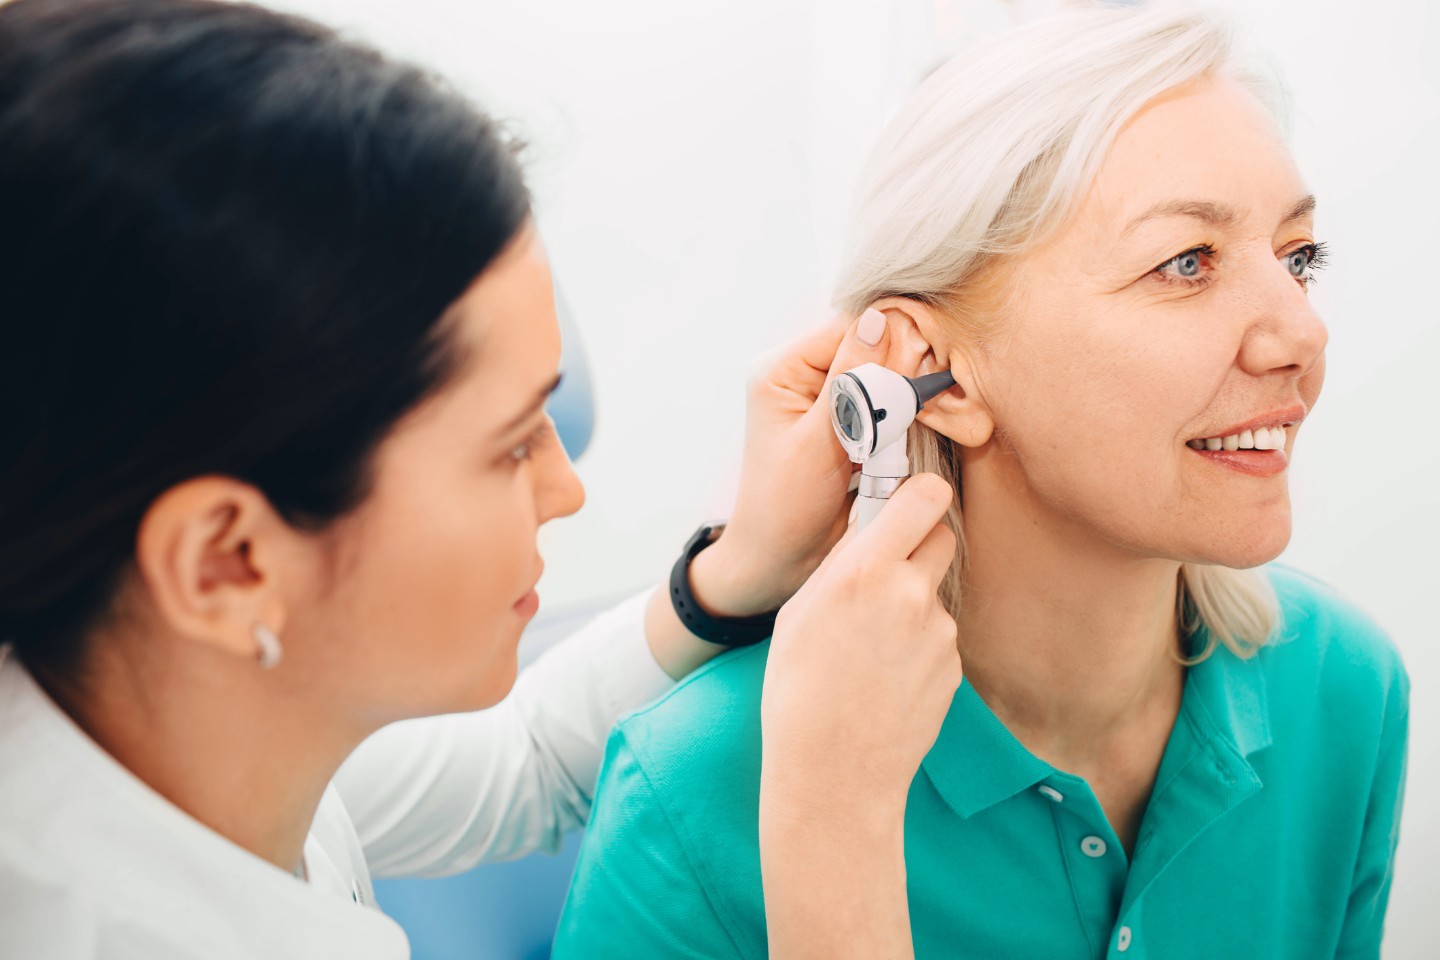 Mature woman getting ear exam at clinic, doctor examining patient ear, using otoscope